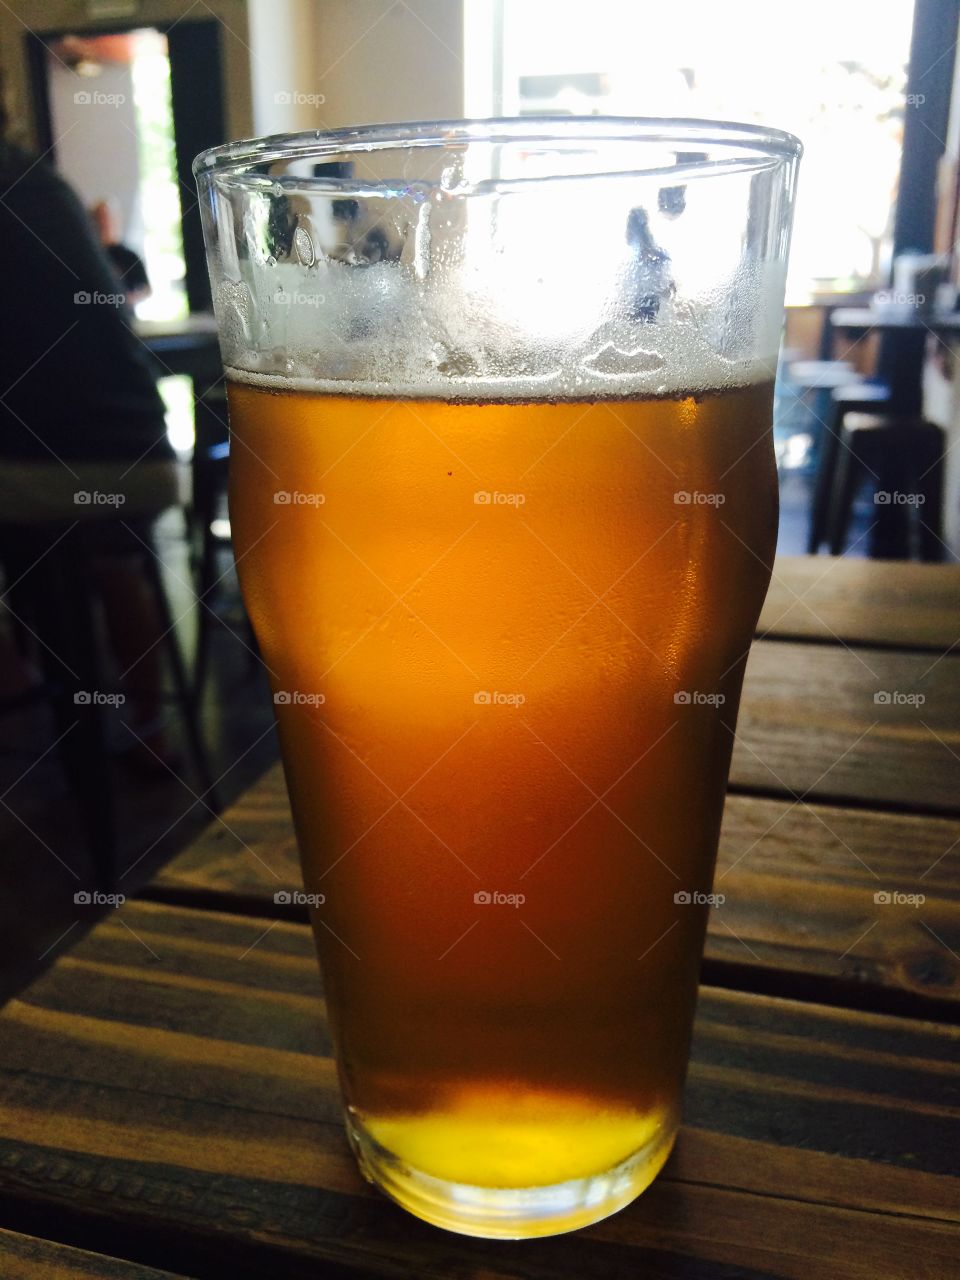 Gastropub IPA. Frosty cold IPA on a hot Labor Day Sunday in Pasadena